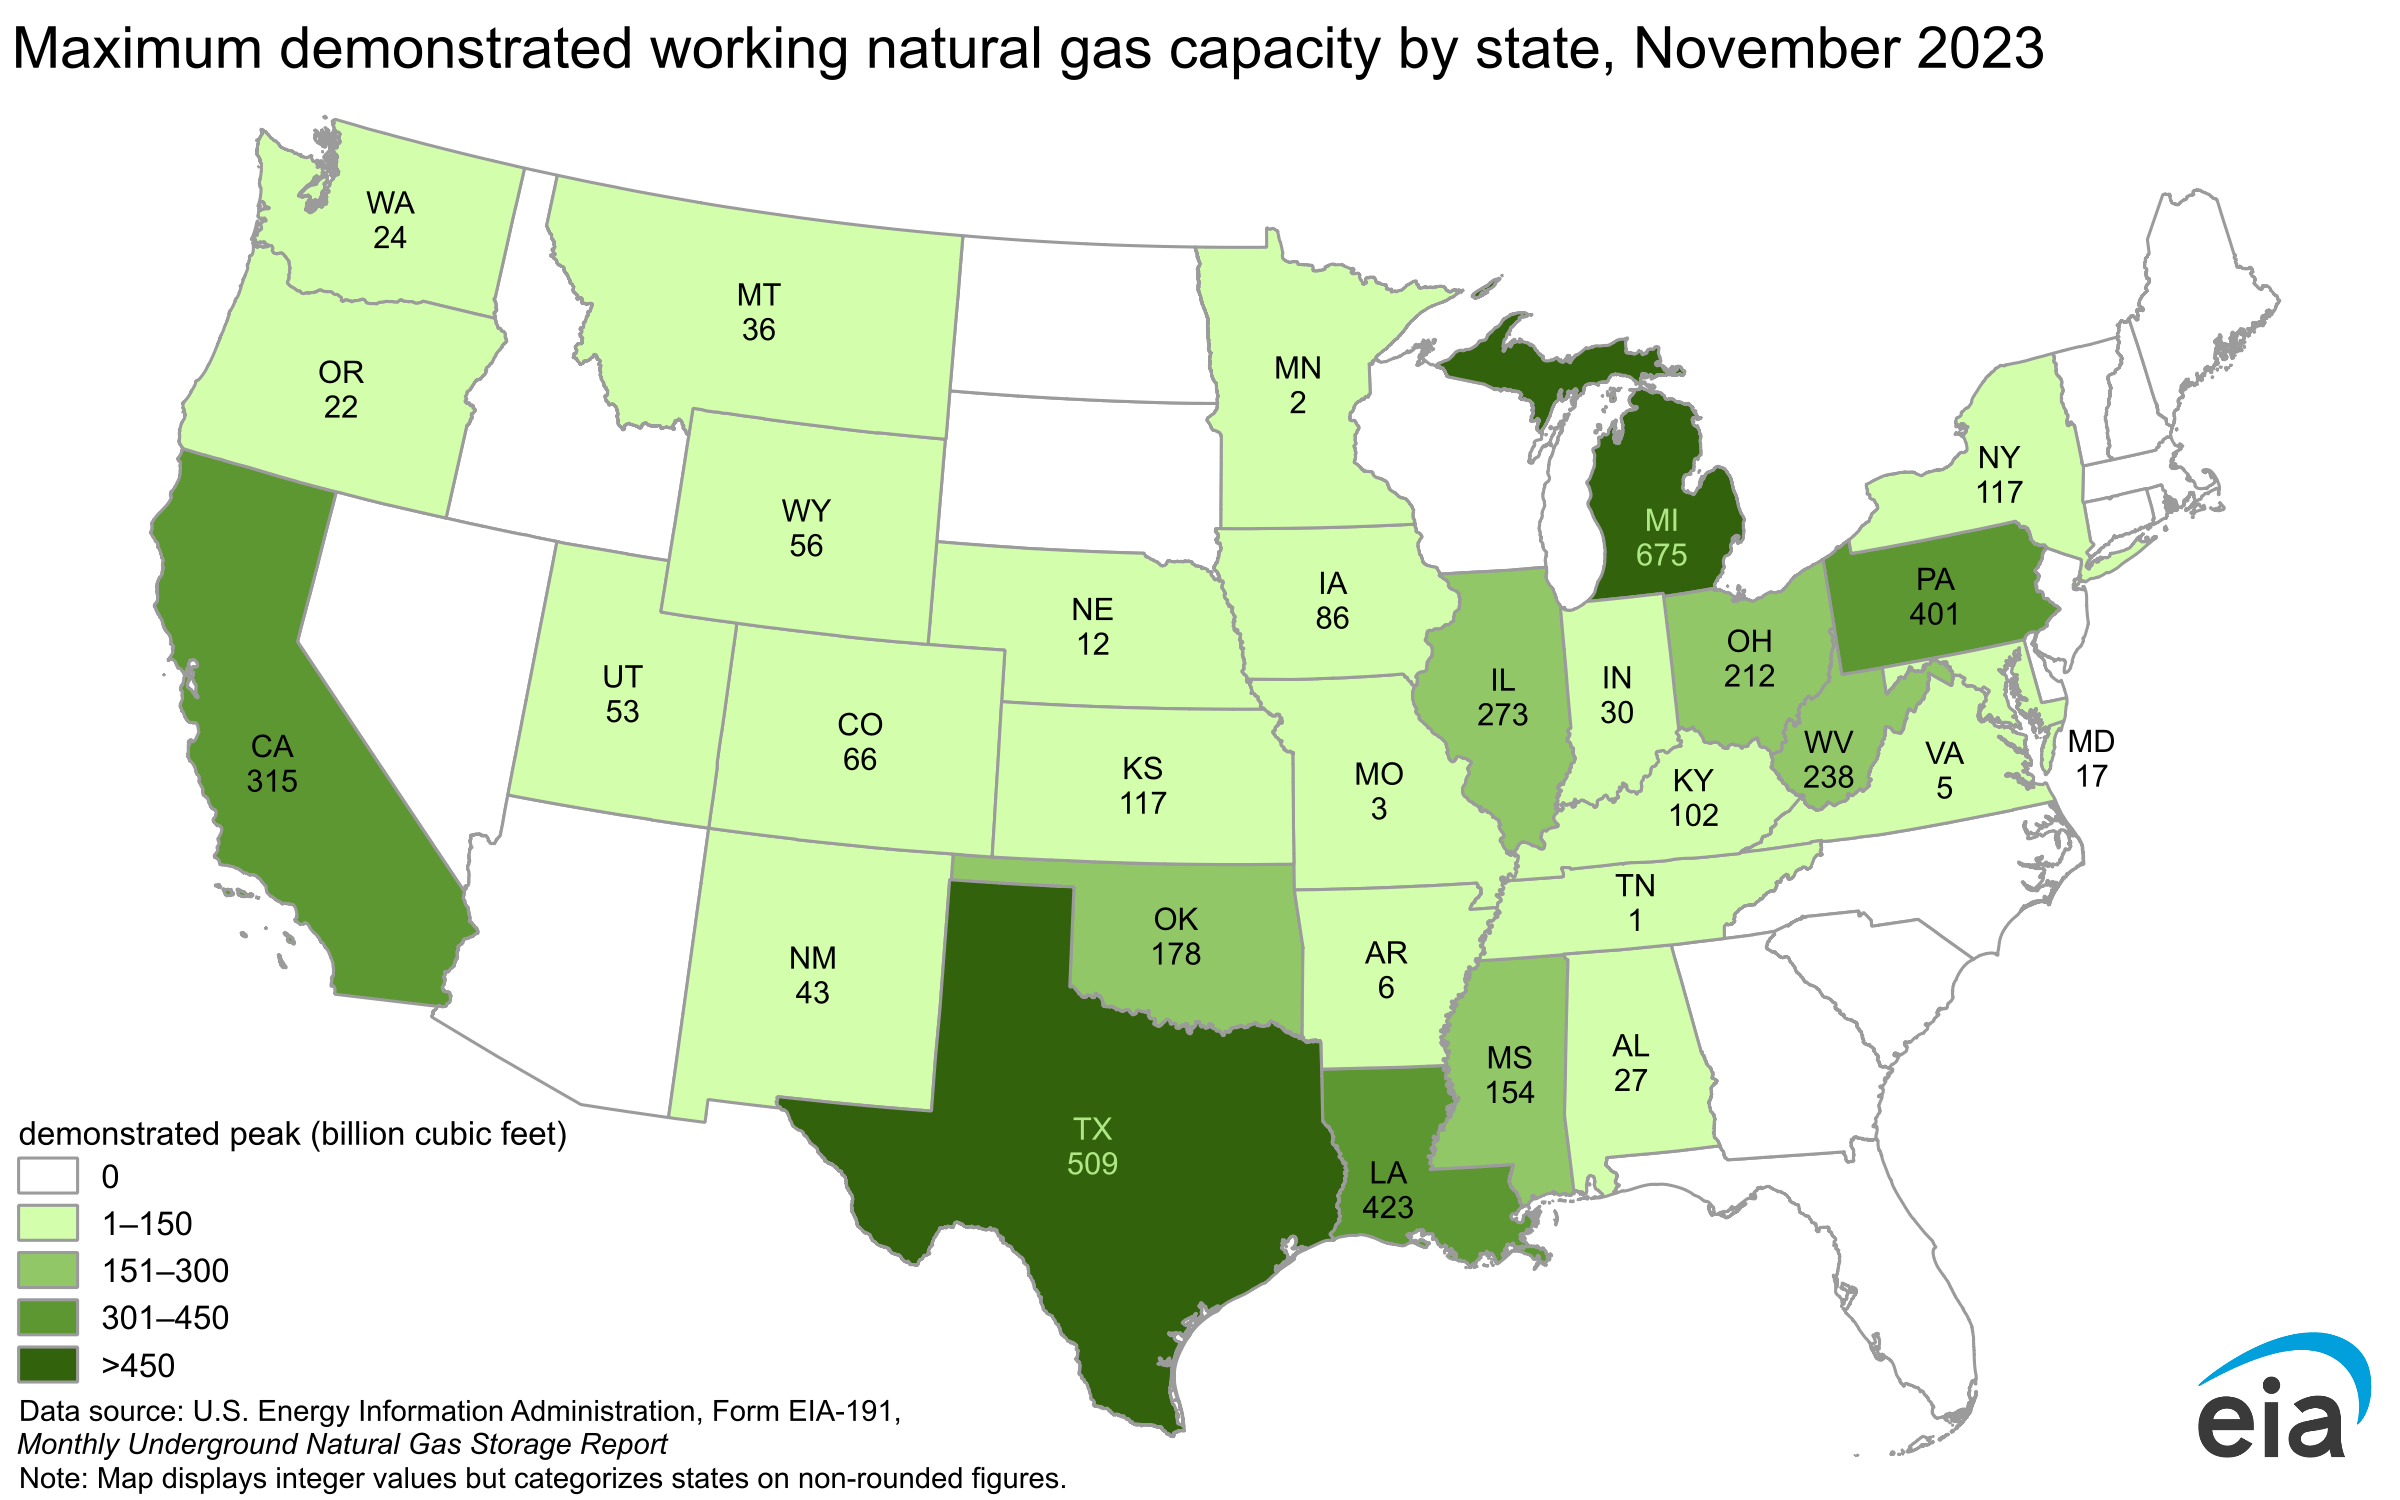 Maximum demonstrated working natural gas capacity by state, November 2023